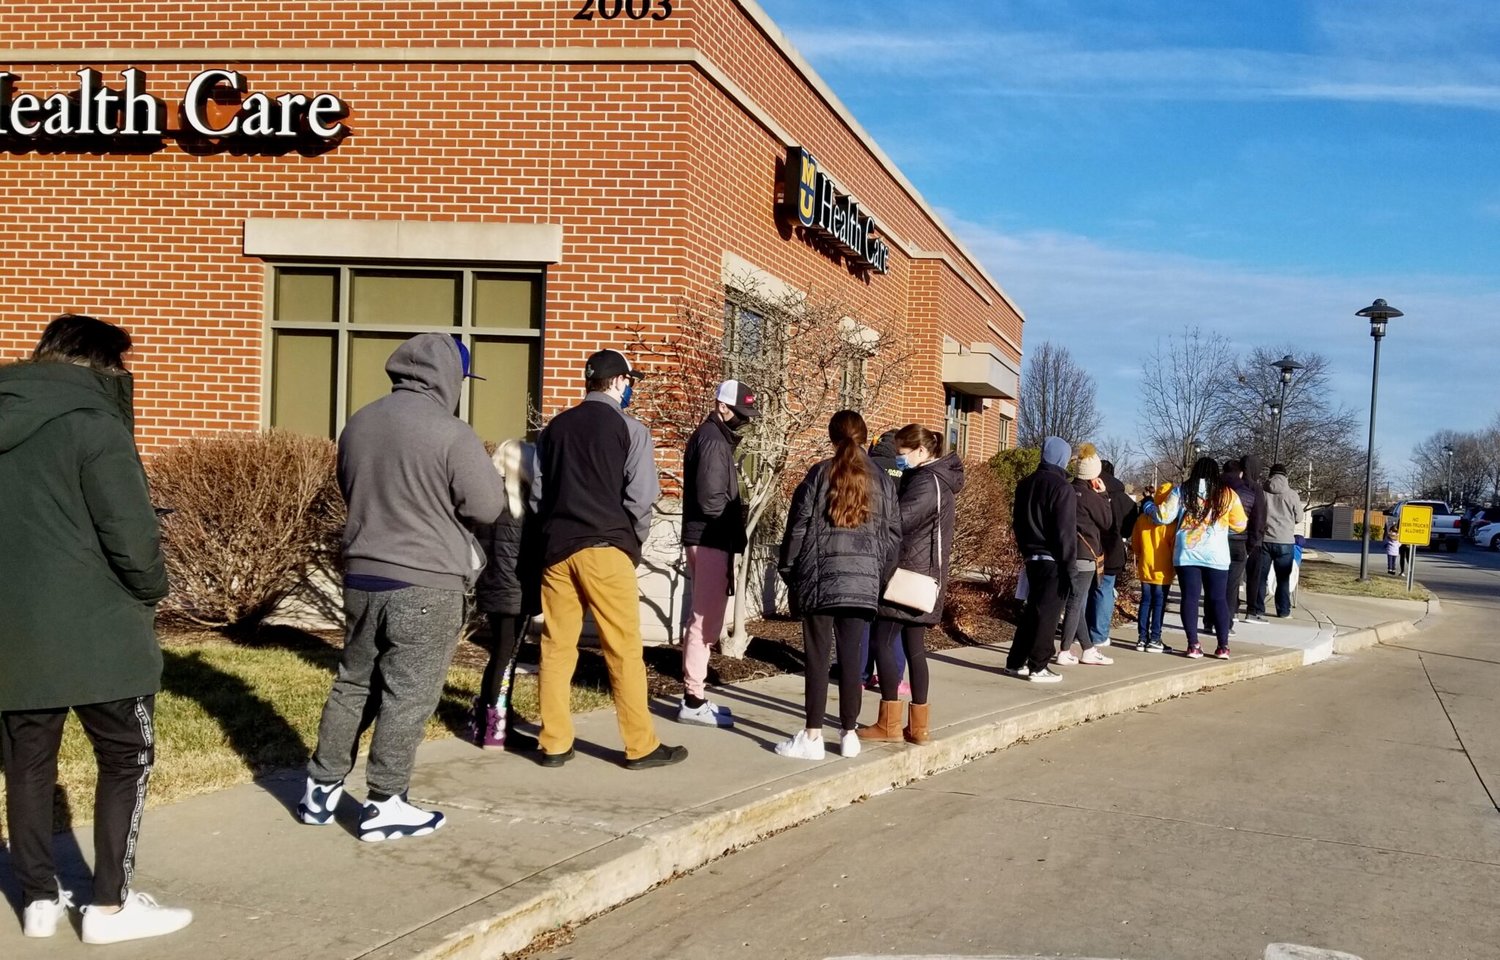 More than 70 people waited in chilly temperatures Wednesday in Columbia for a COVID-19 test. MU Health Care has one site where people can go for a test without an appointment.